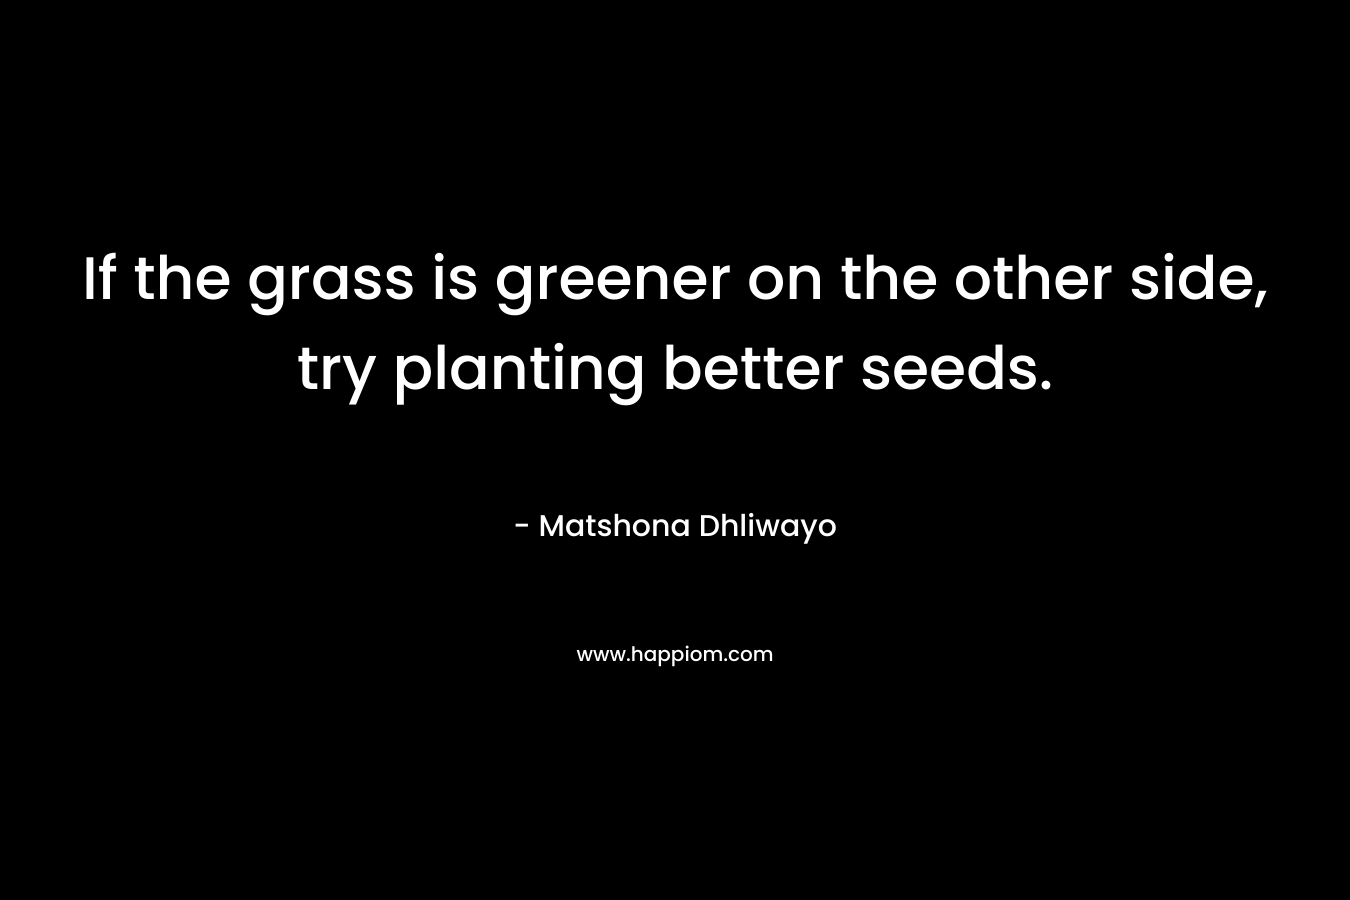 If the grass is greener on the other side, try planting better seeds. – Matshona Dhliwayo